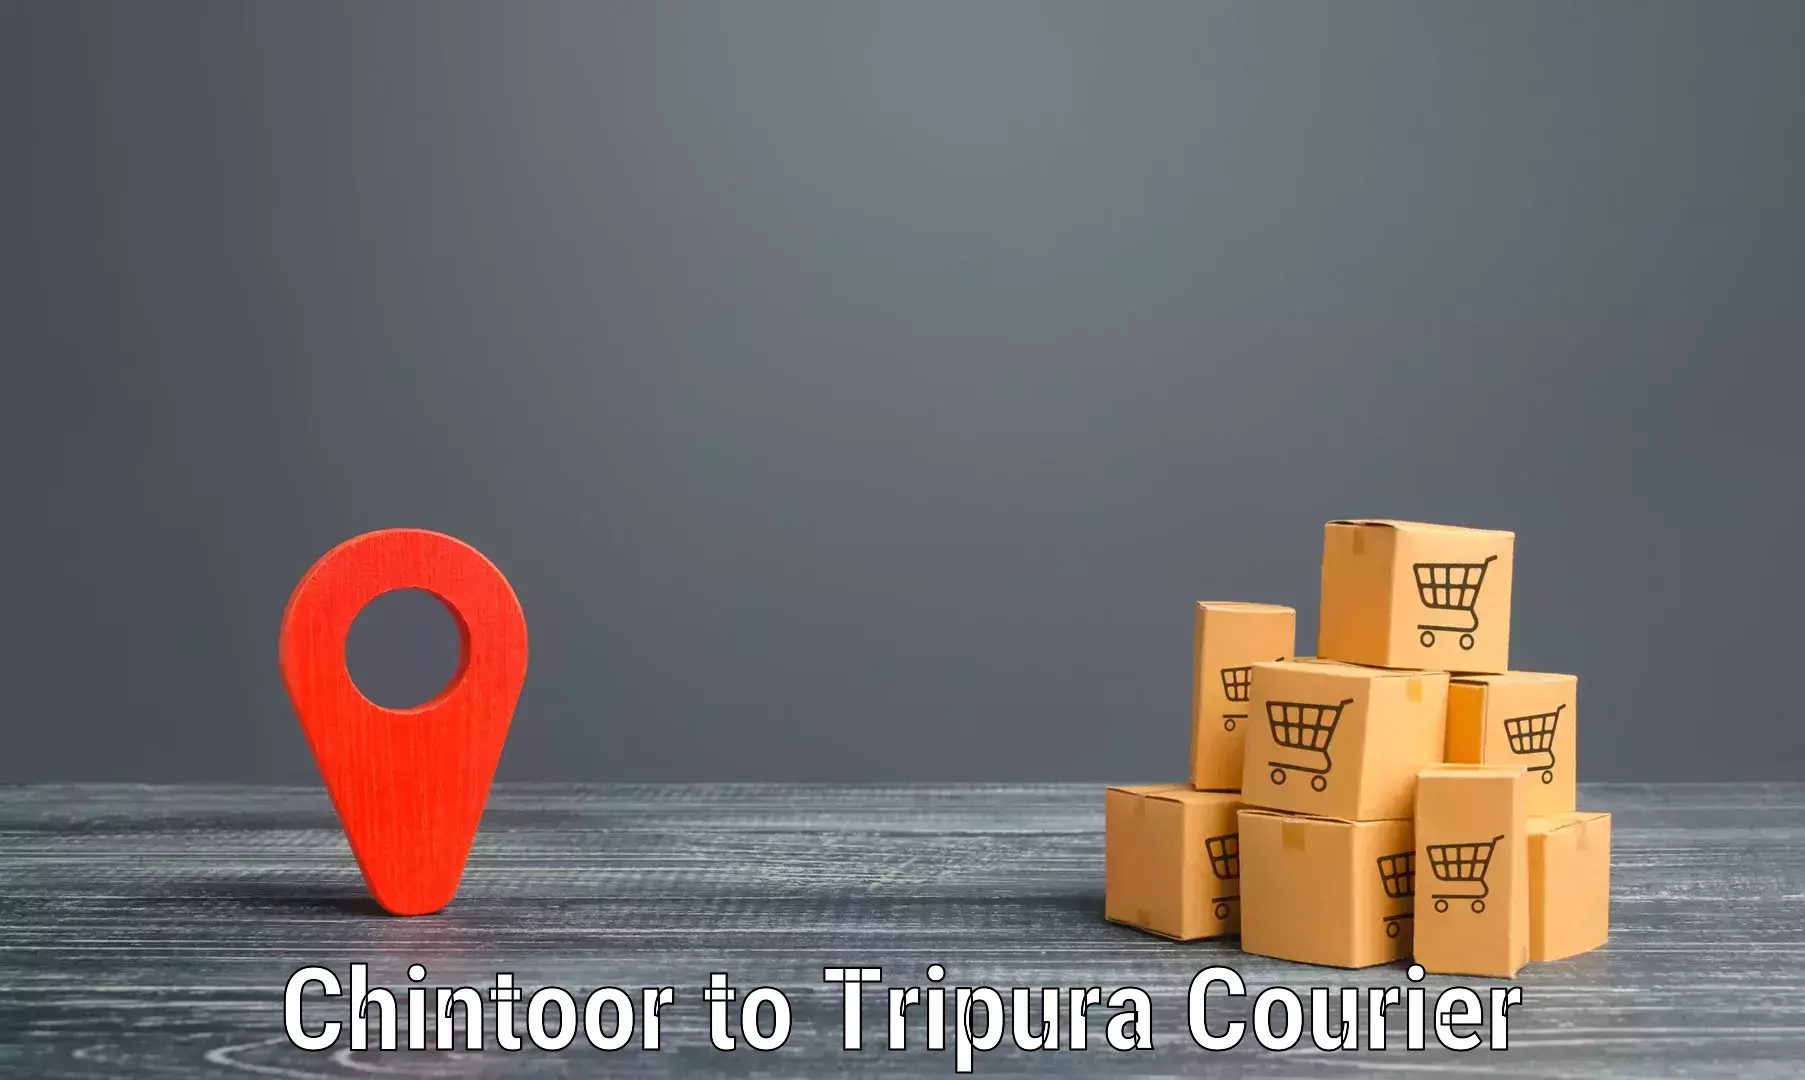 Easy return solutions Chintoor to North Tripura